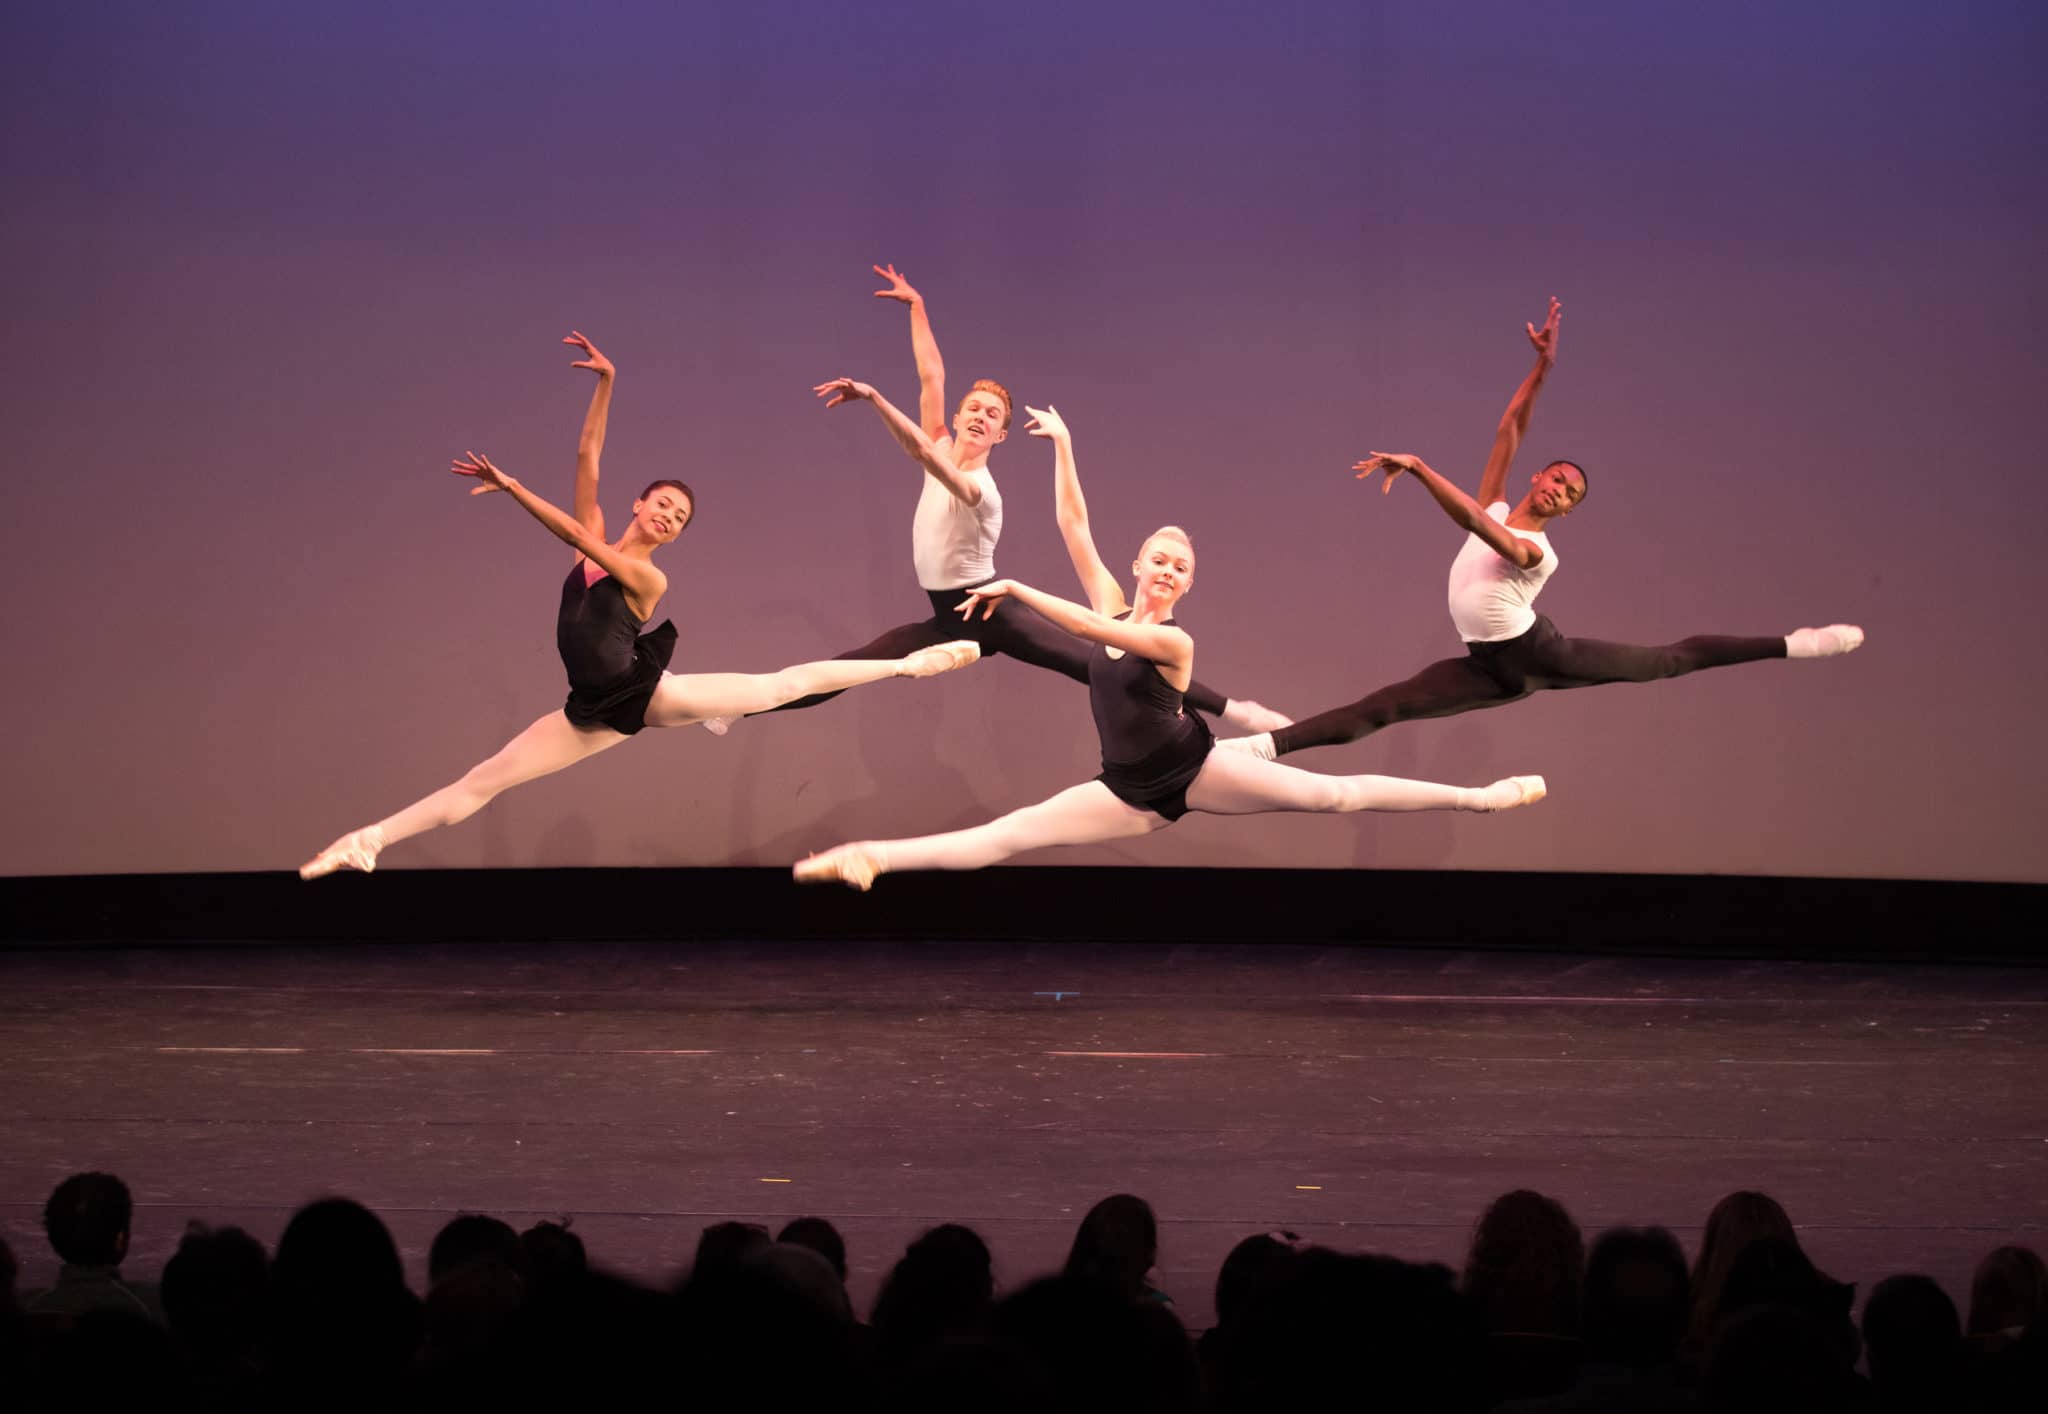 Photograph of four dancers in the air mid-leap